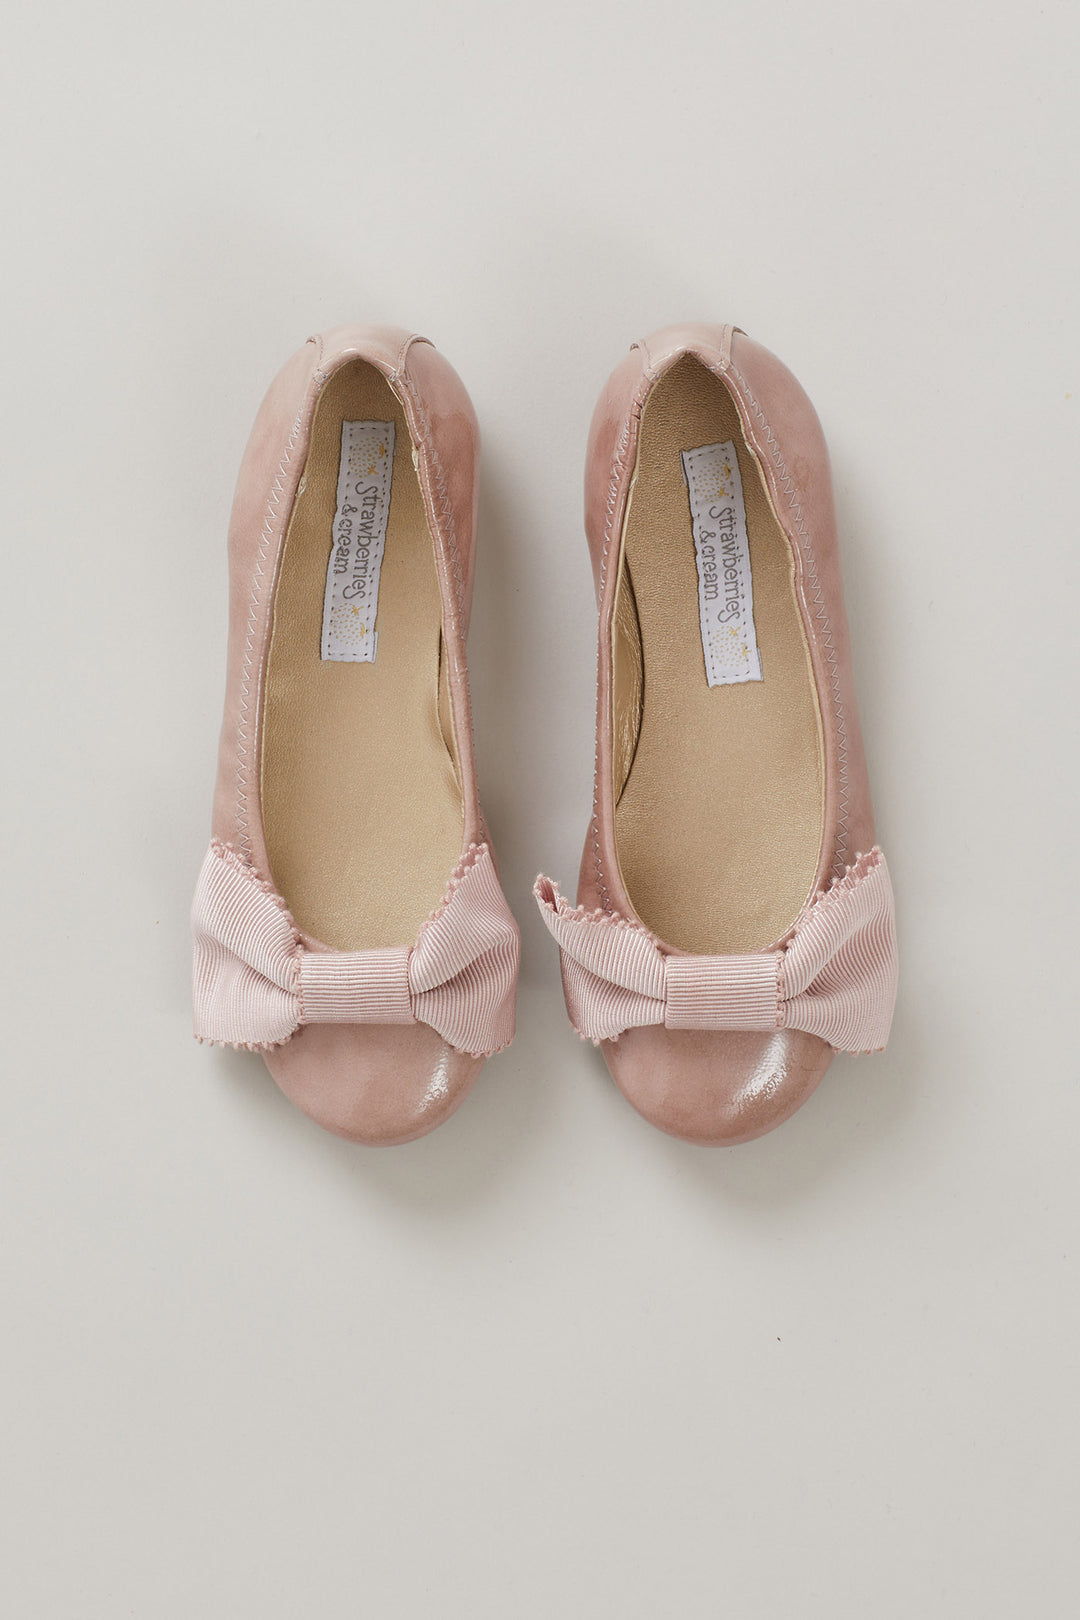 Ballerina Bow In Powder Pink Patent LeatherBallerina Bow In Powder Pink Patent Leather